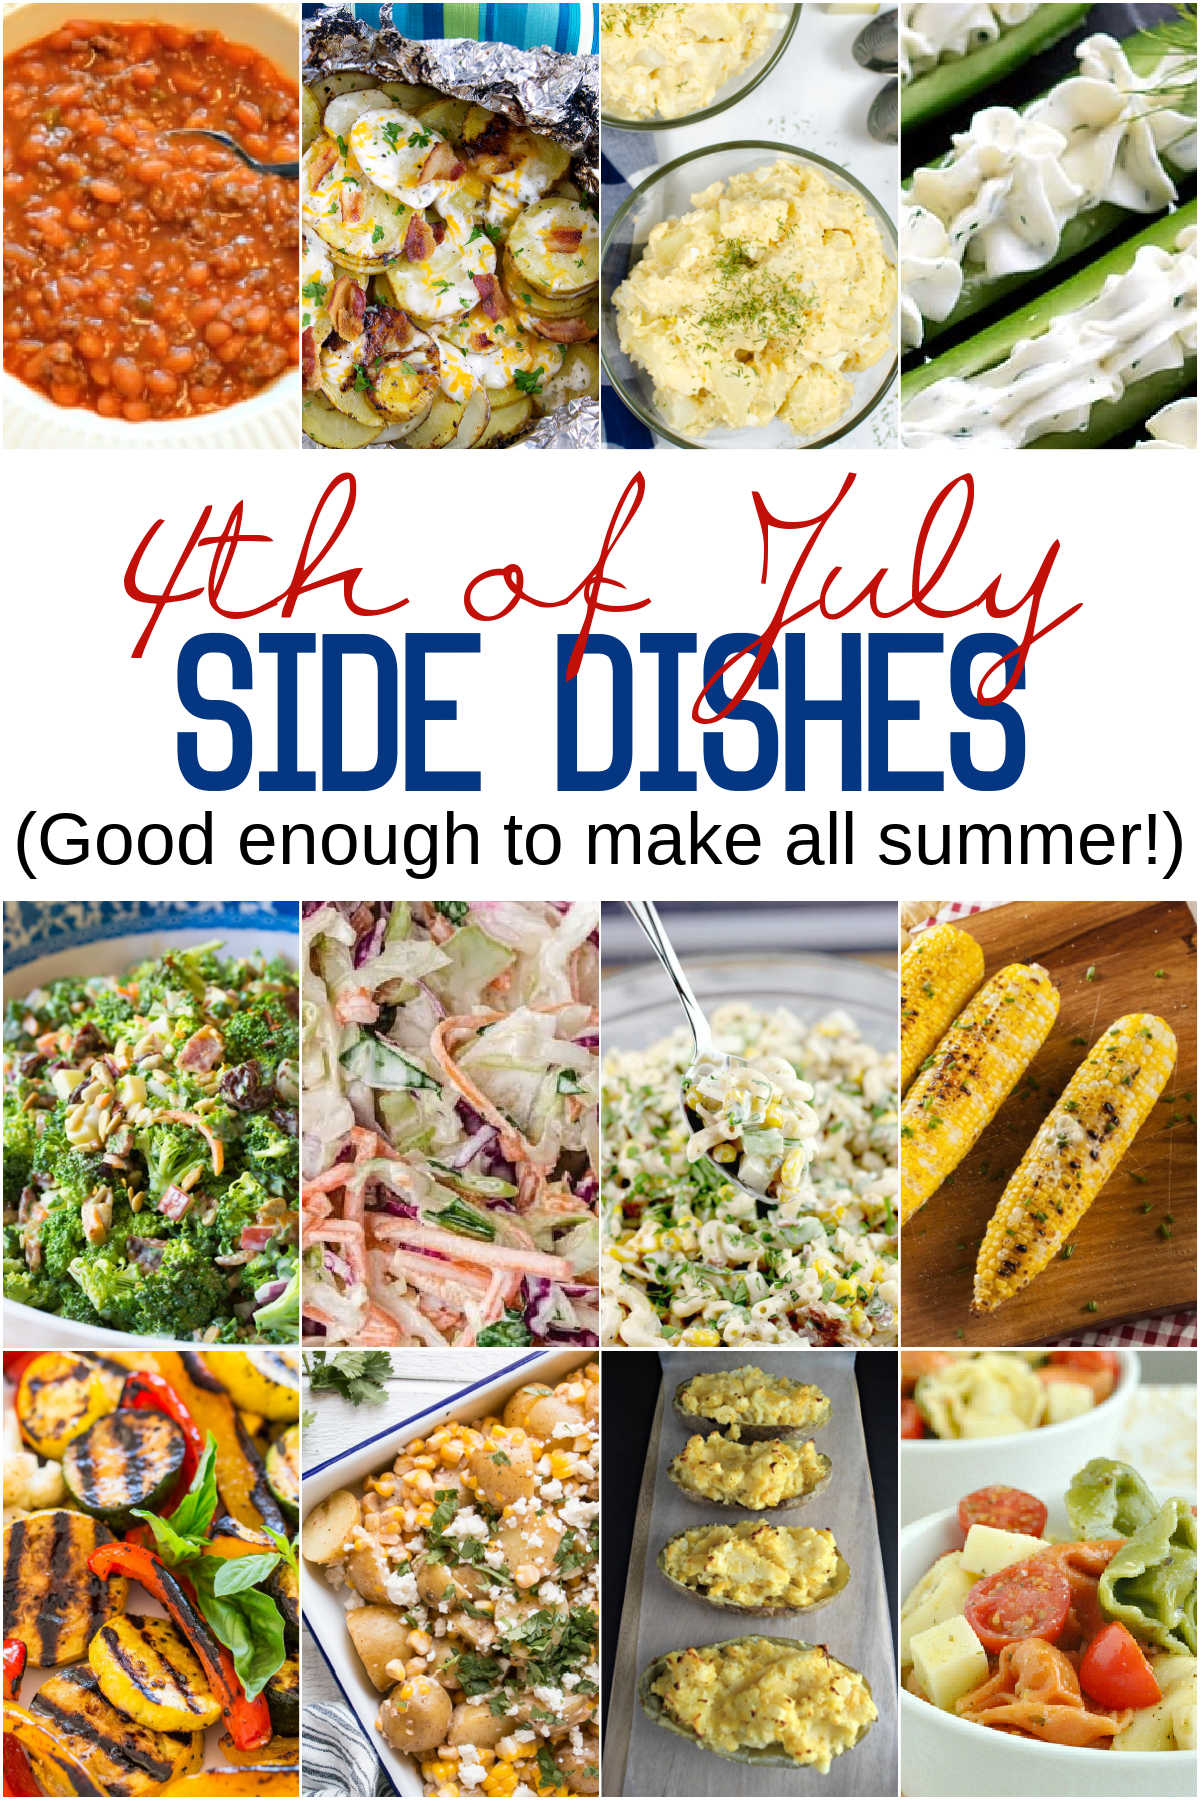 Collage of 4th of July side dishes that you can make all summer long.